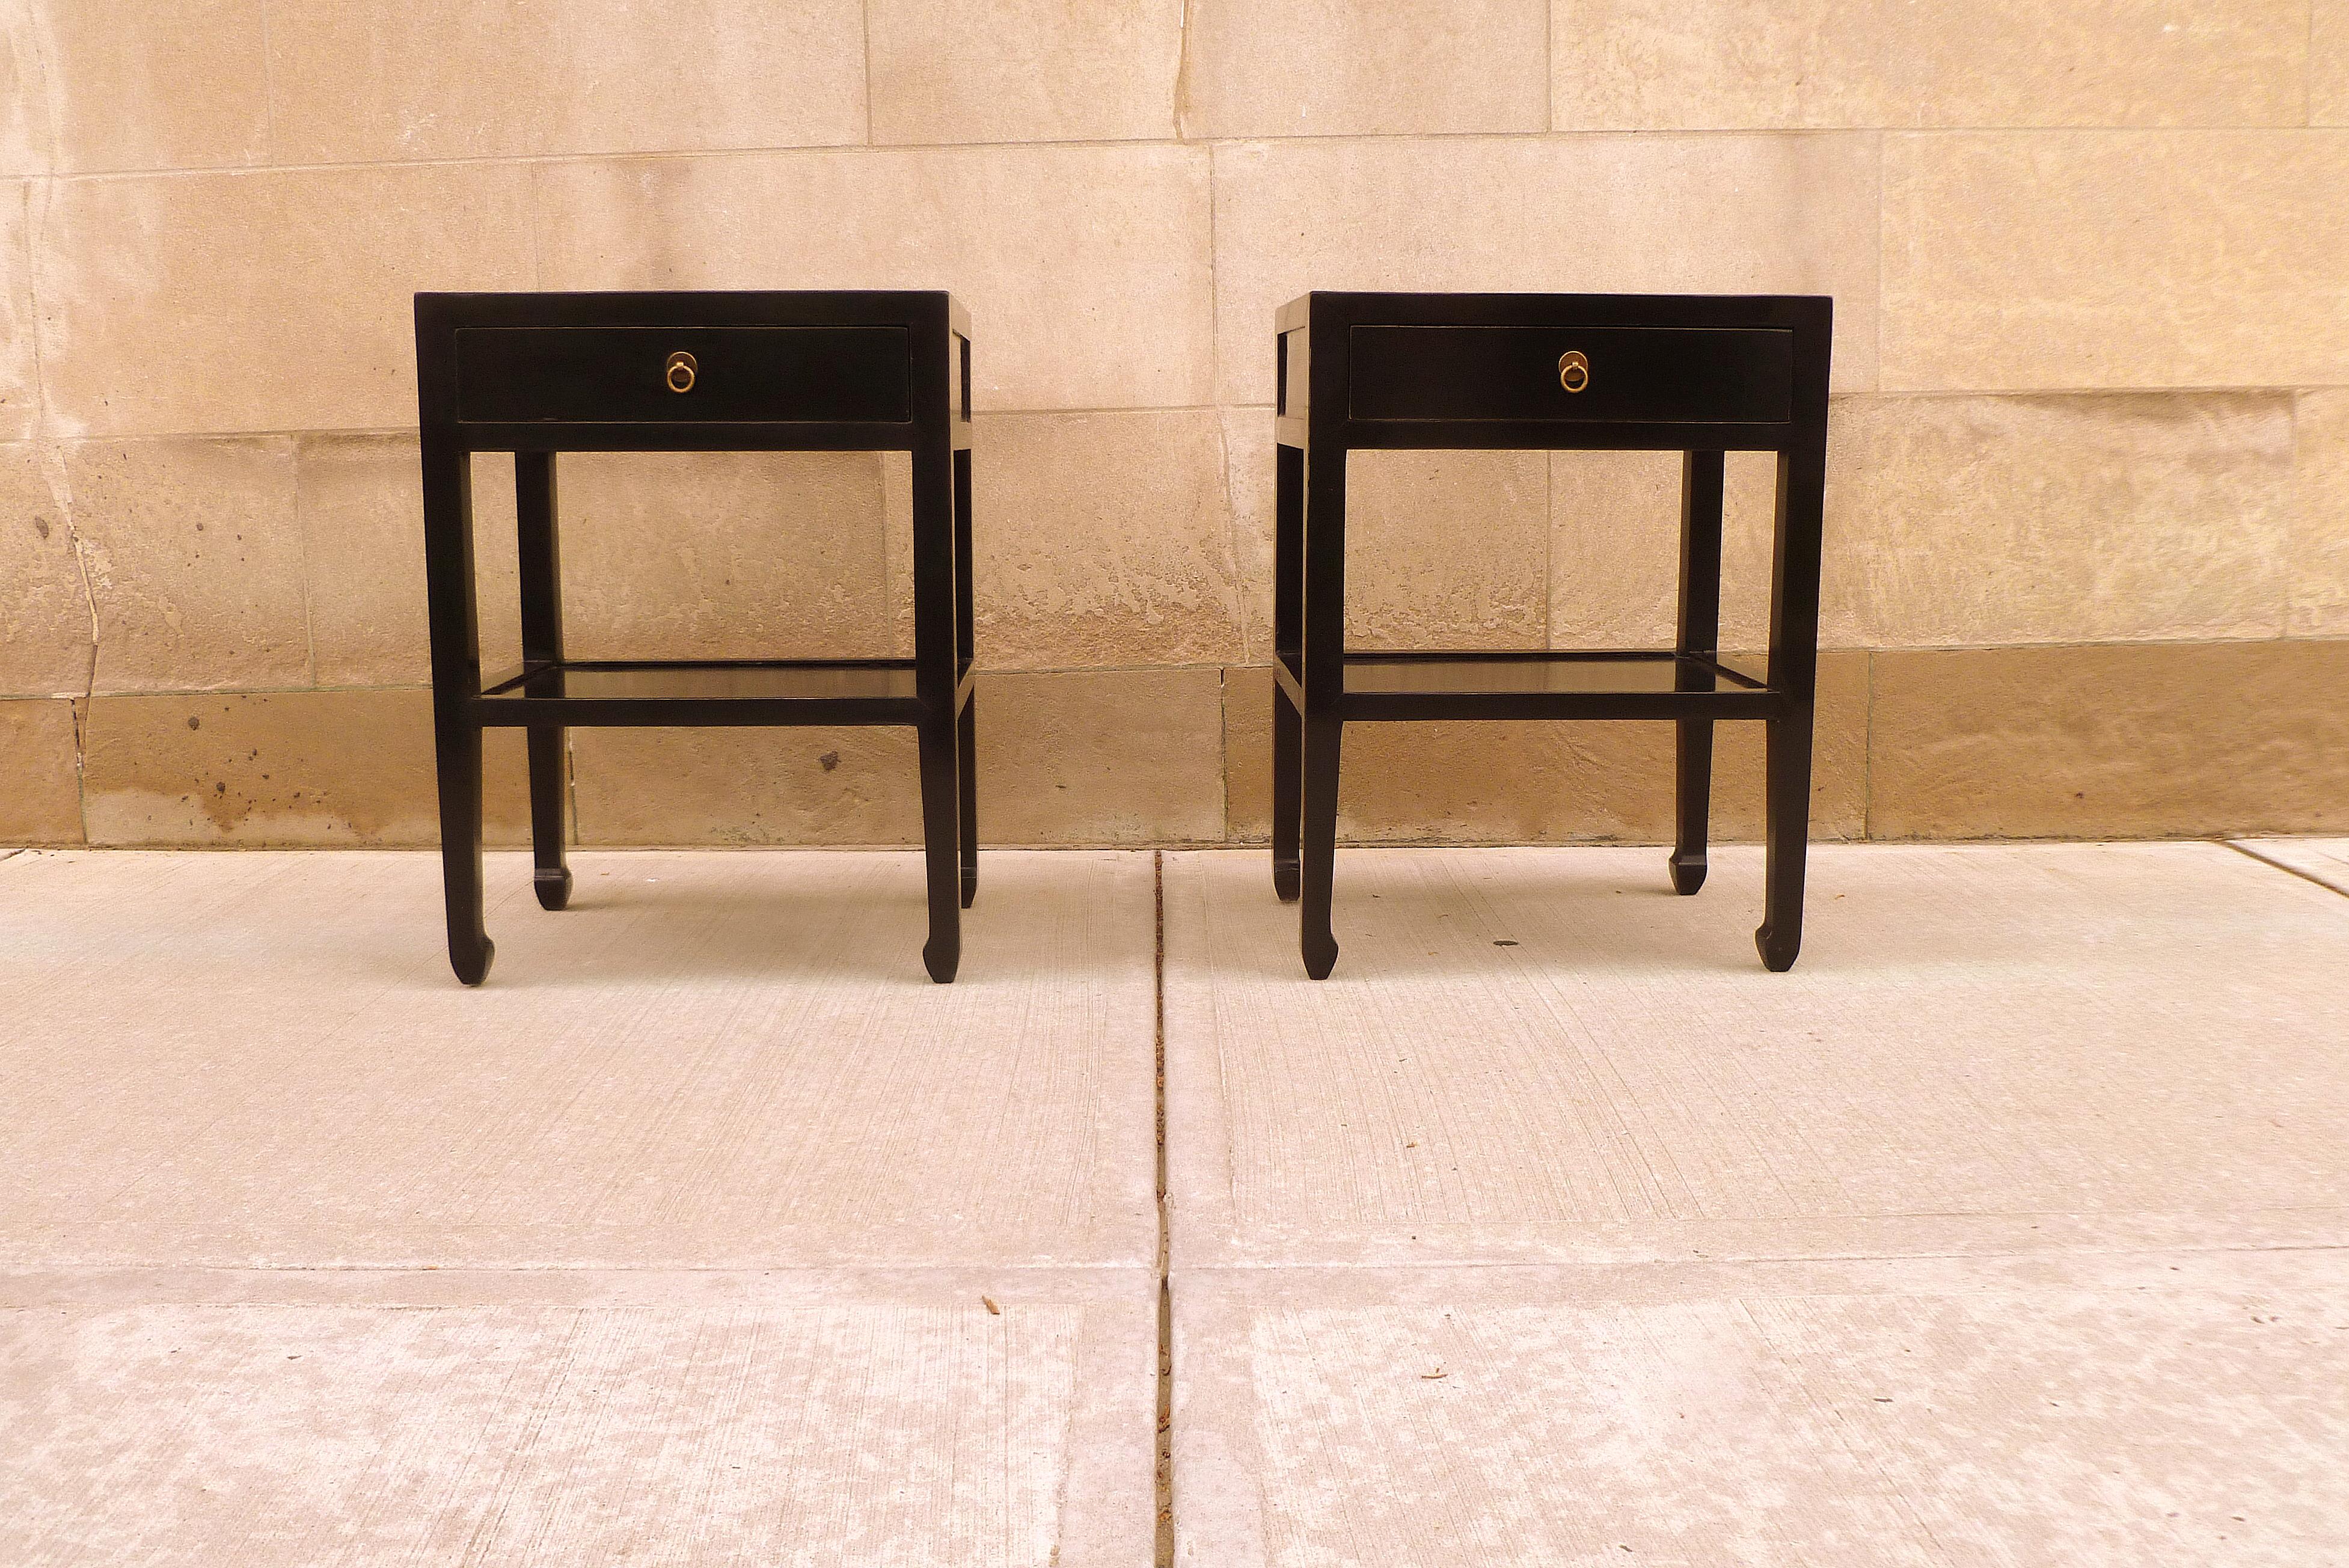 Pair of black lacquer end tables, with drawers and shelf.